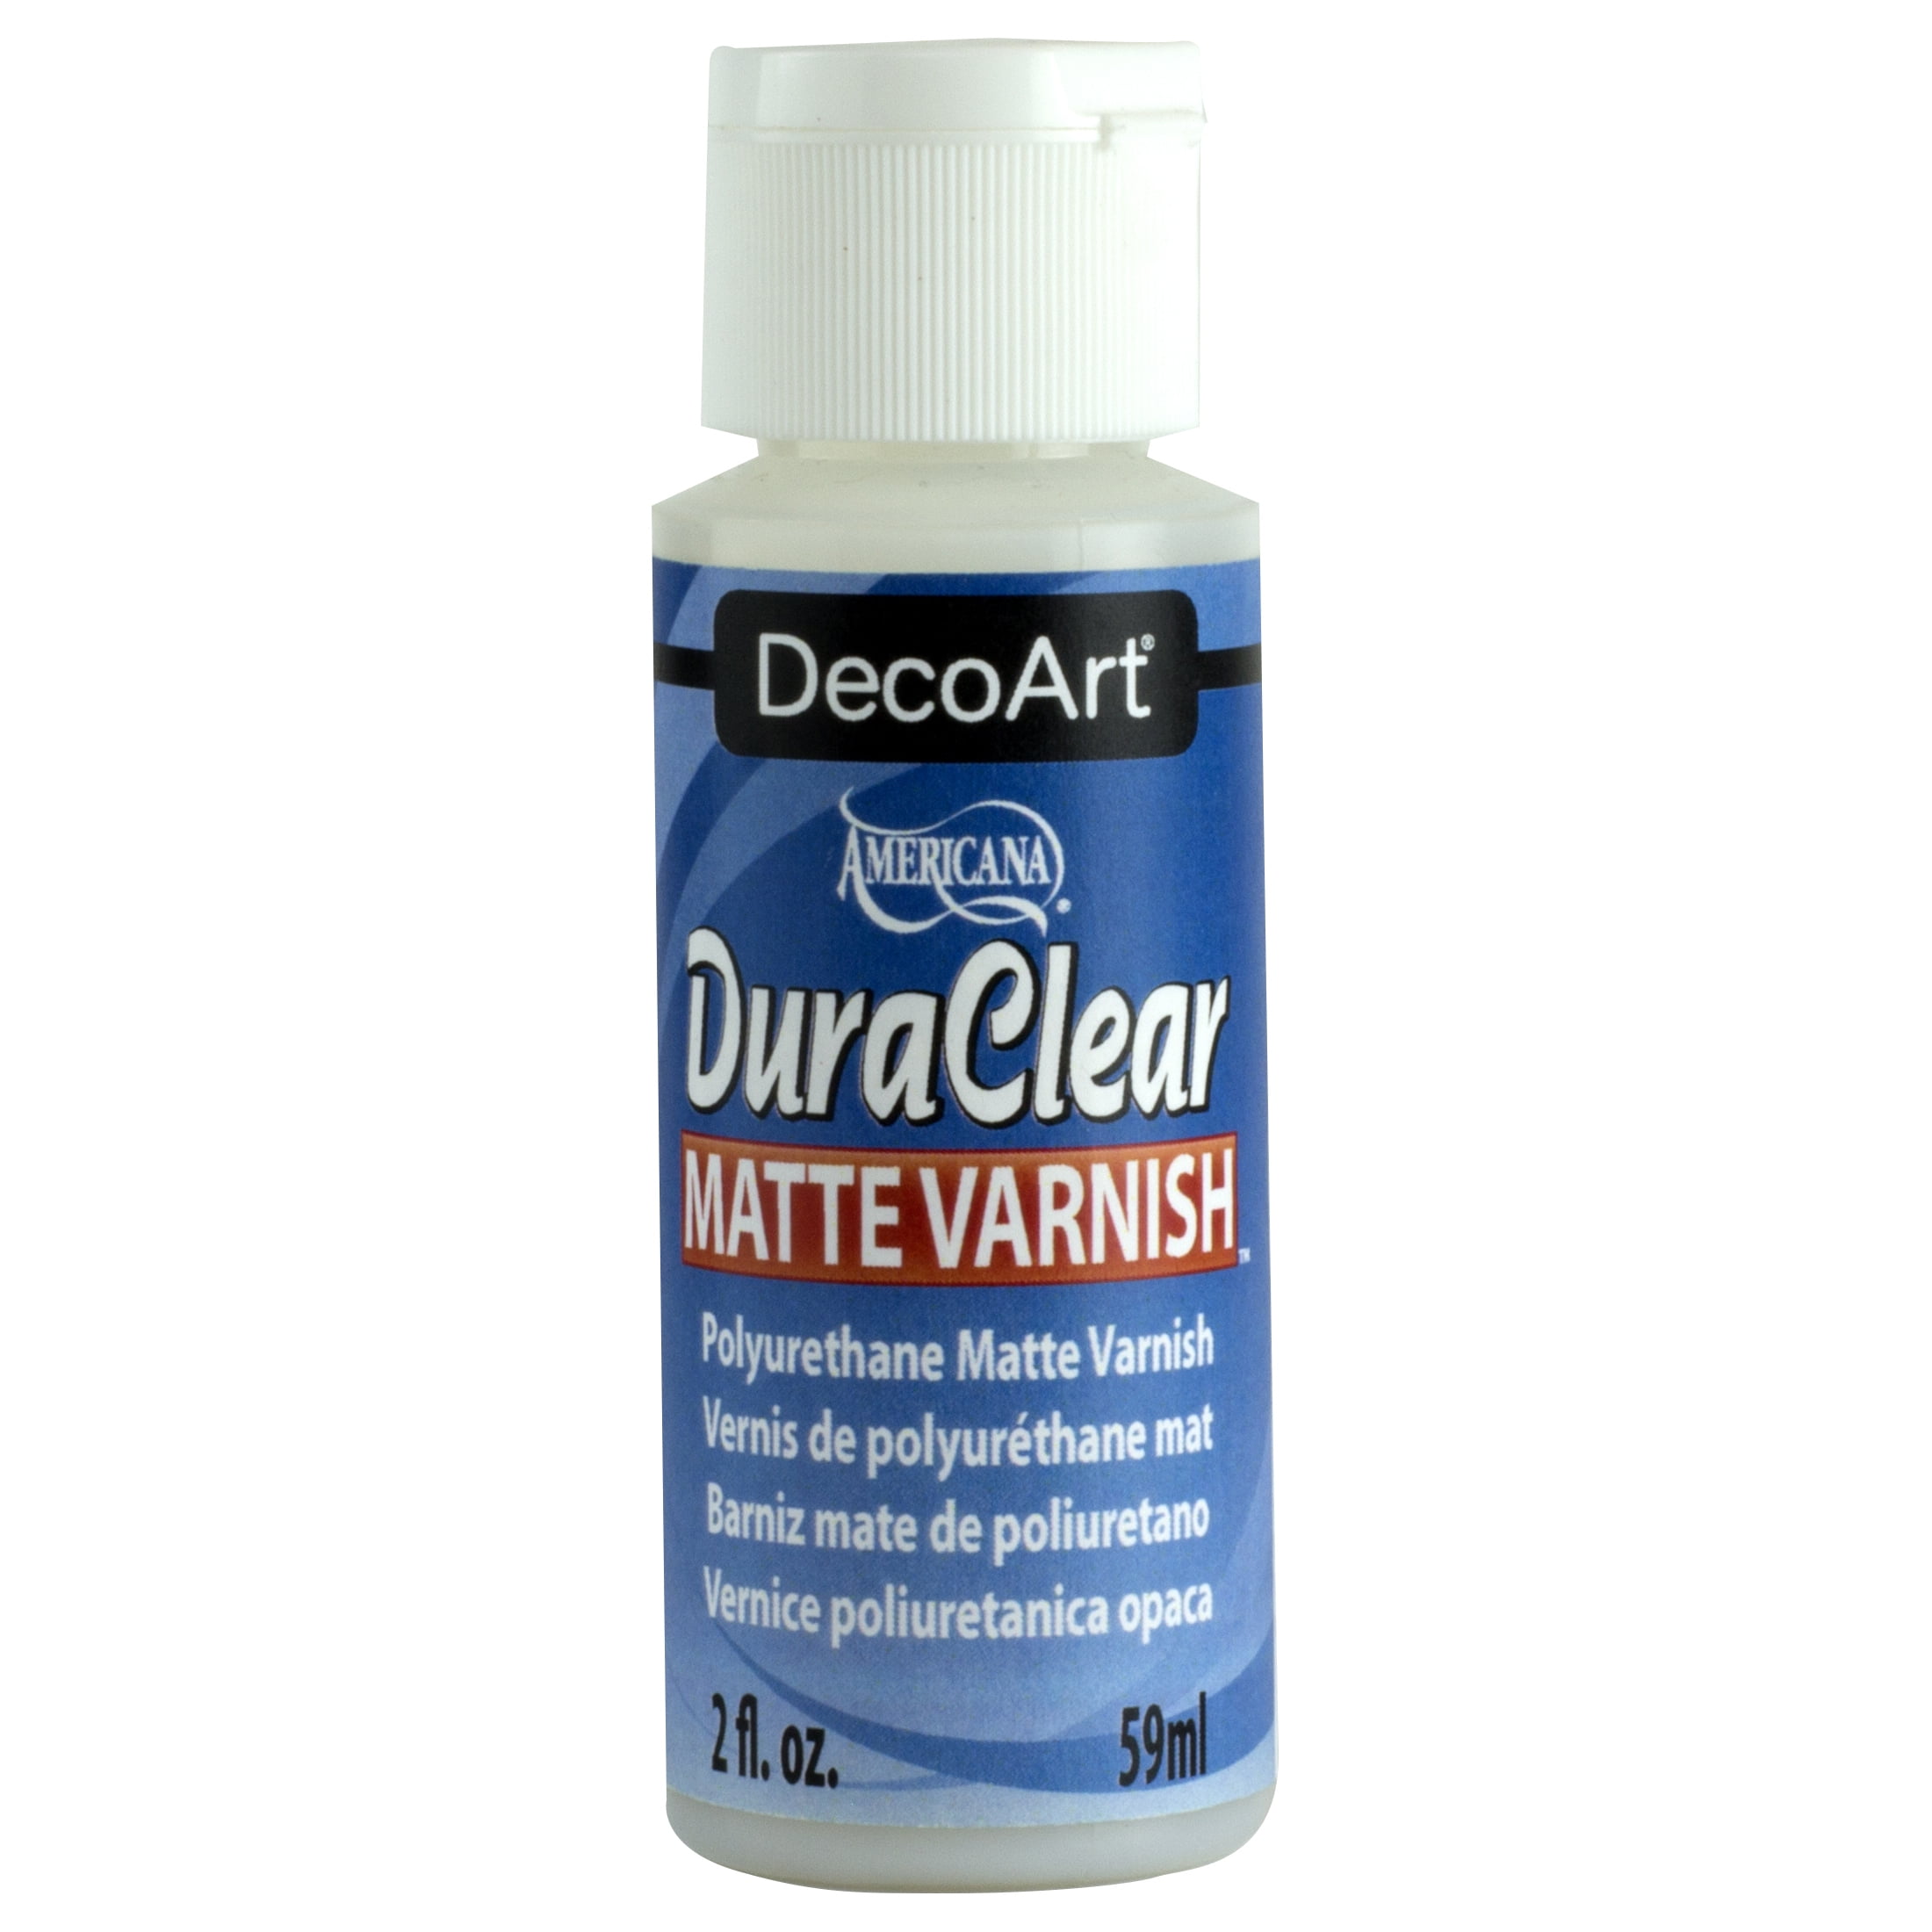  DecoArt DS19-9 American DuraClear Varnishes, 8-Ounce, DuraClear  Gloss Varnish : Tools & Home Improvement